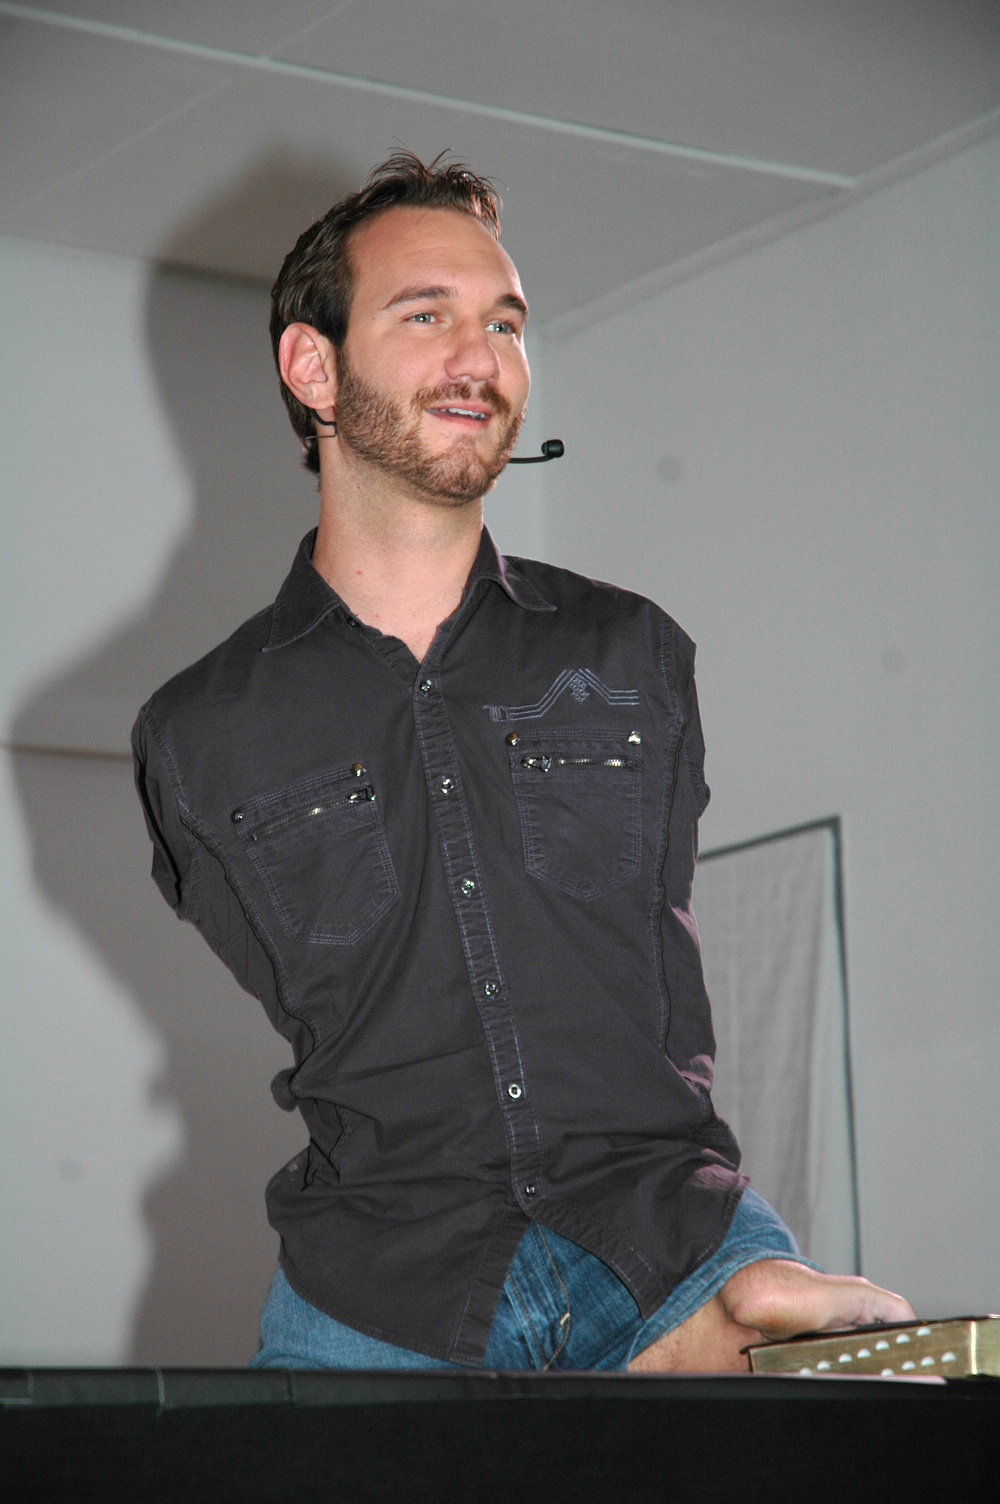 Nick_Vujicic_speaking_in_a_church_in_Ehringshausen,_Germany_-_20110401-02